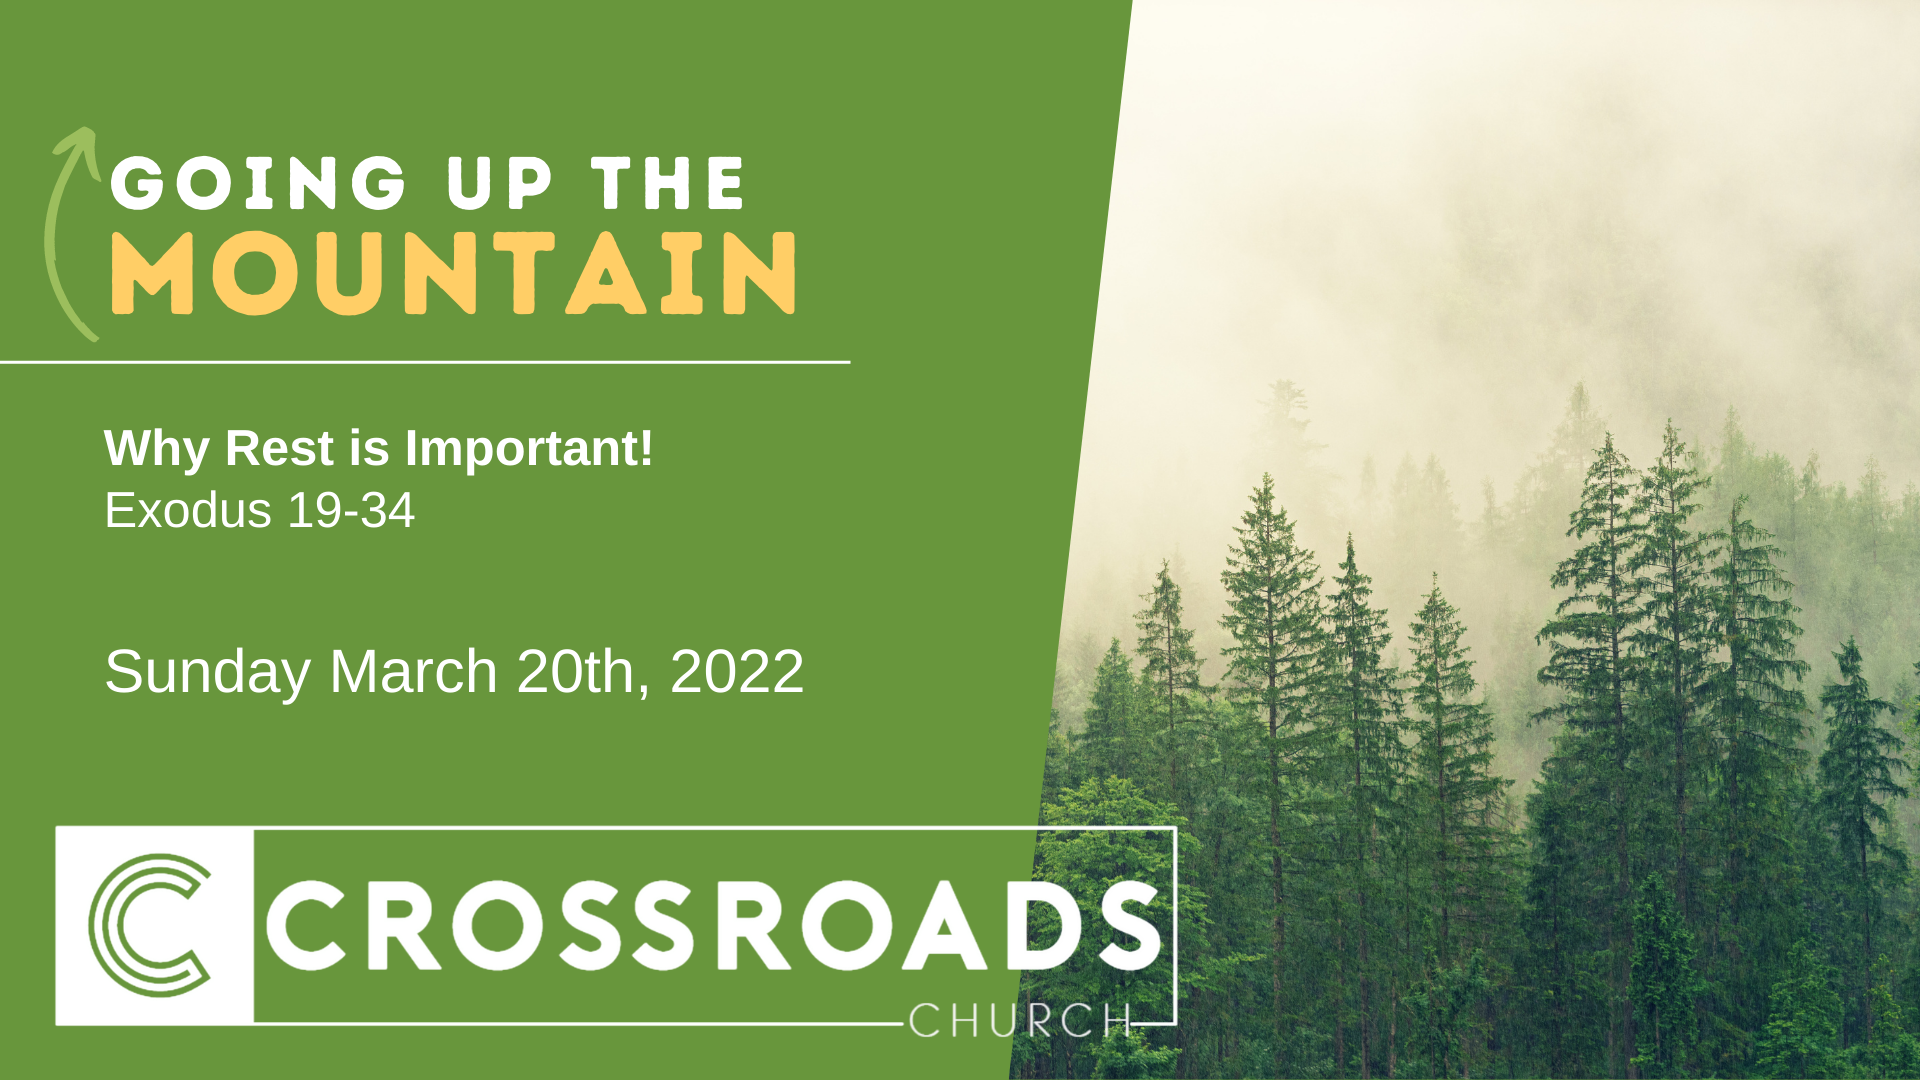 Going Up The Mountain | Why Rest is Important! | Exodus 19-34 | March 20, 2022